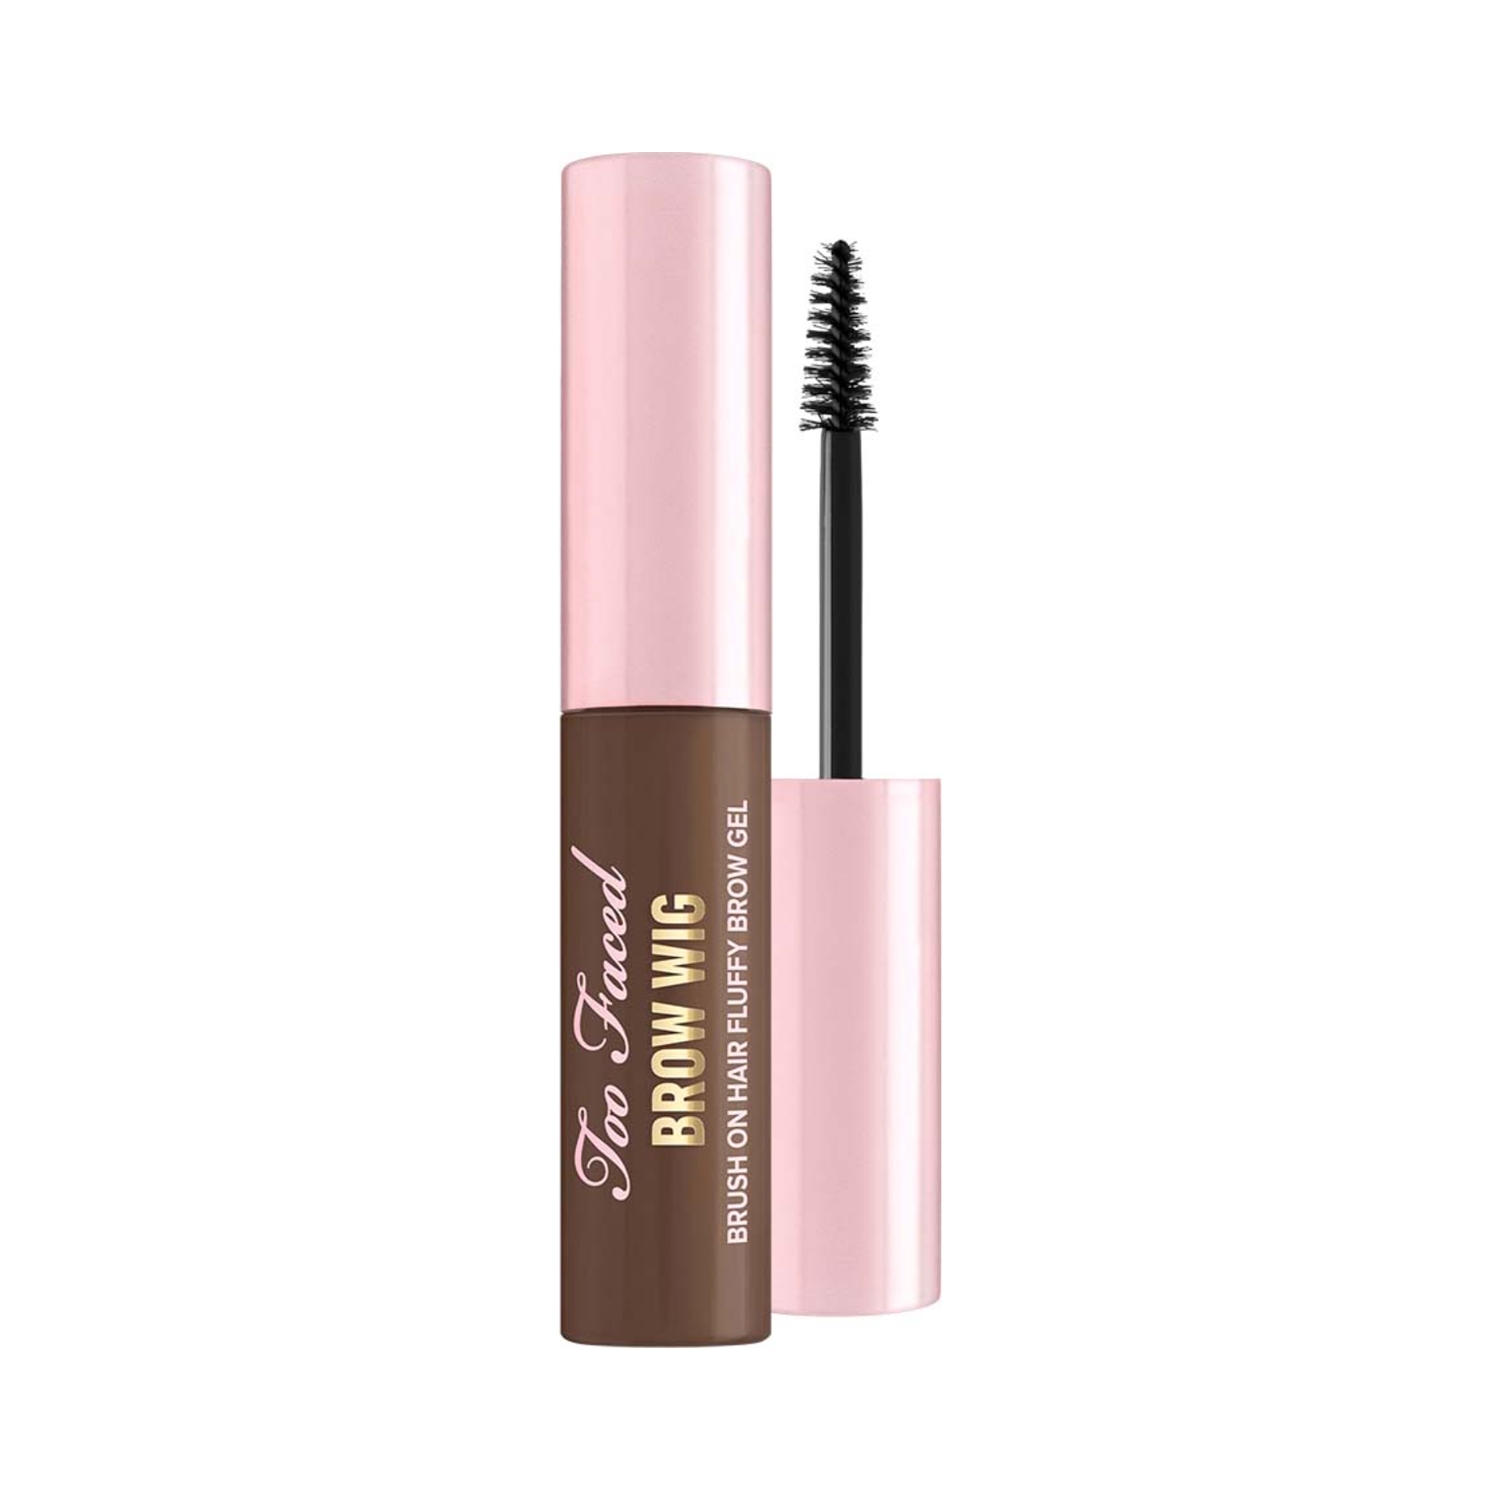 Too Faced | Too Faced Brow Wig Eyebrow Gel - Natural Blonde (5.5ml)